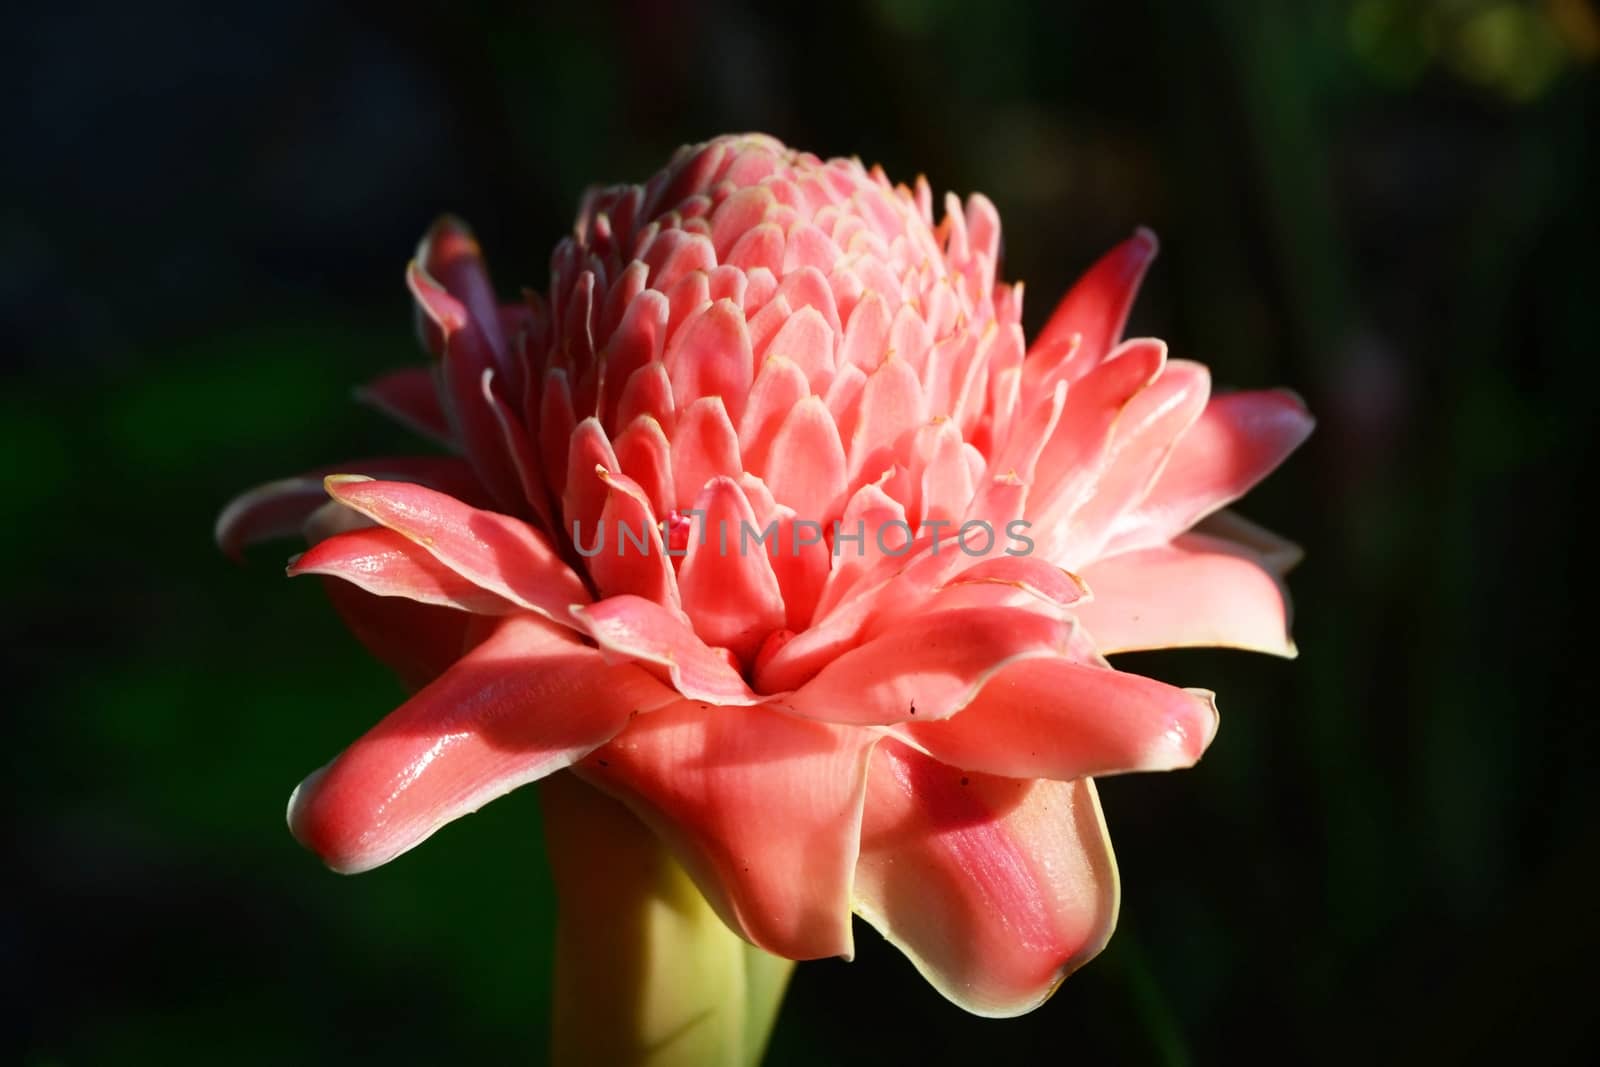 Red flower Torch ginger